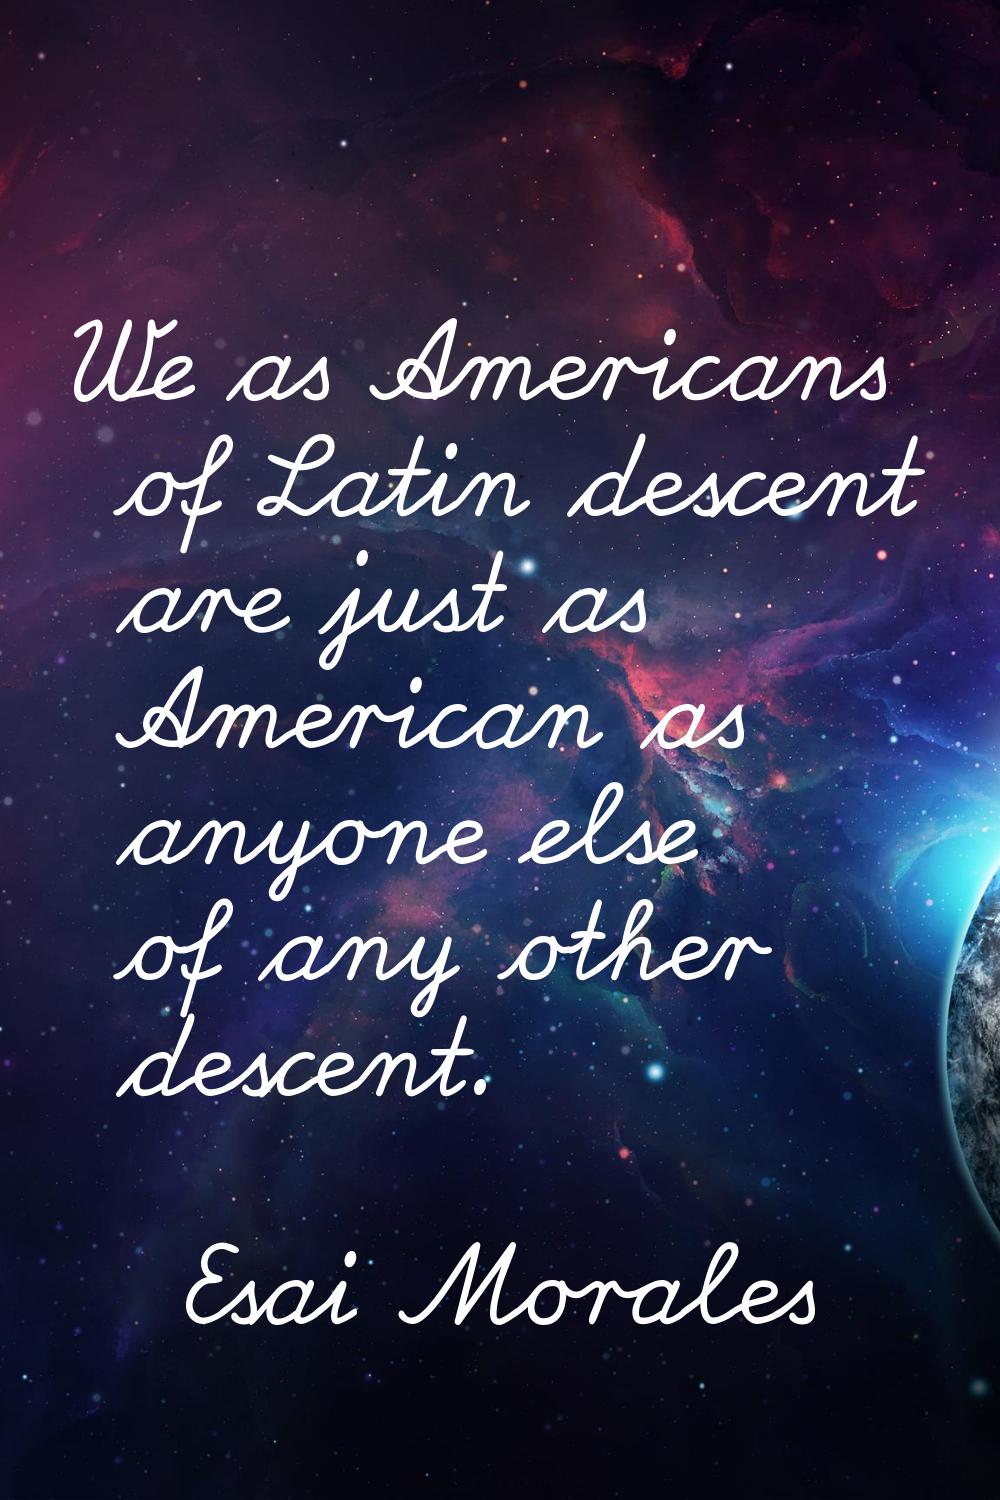 We as Americans of Latin descent are just as American as anyone else of any other descent.